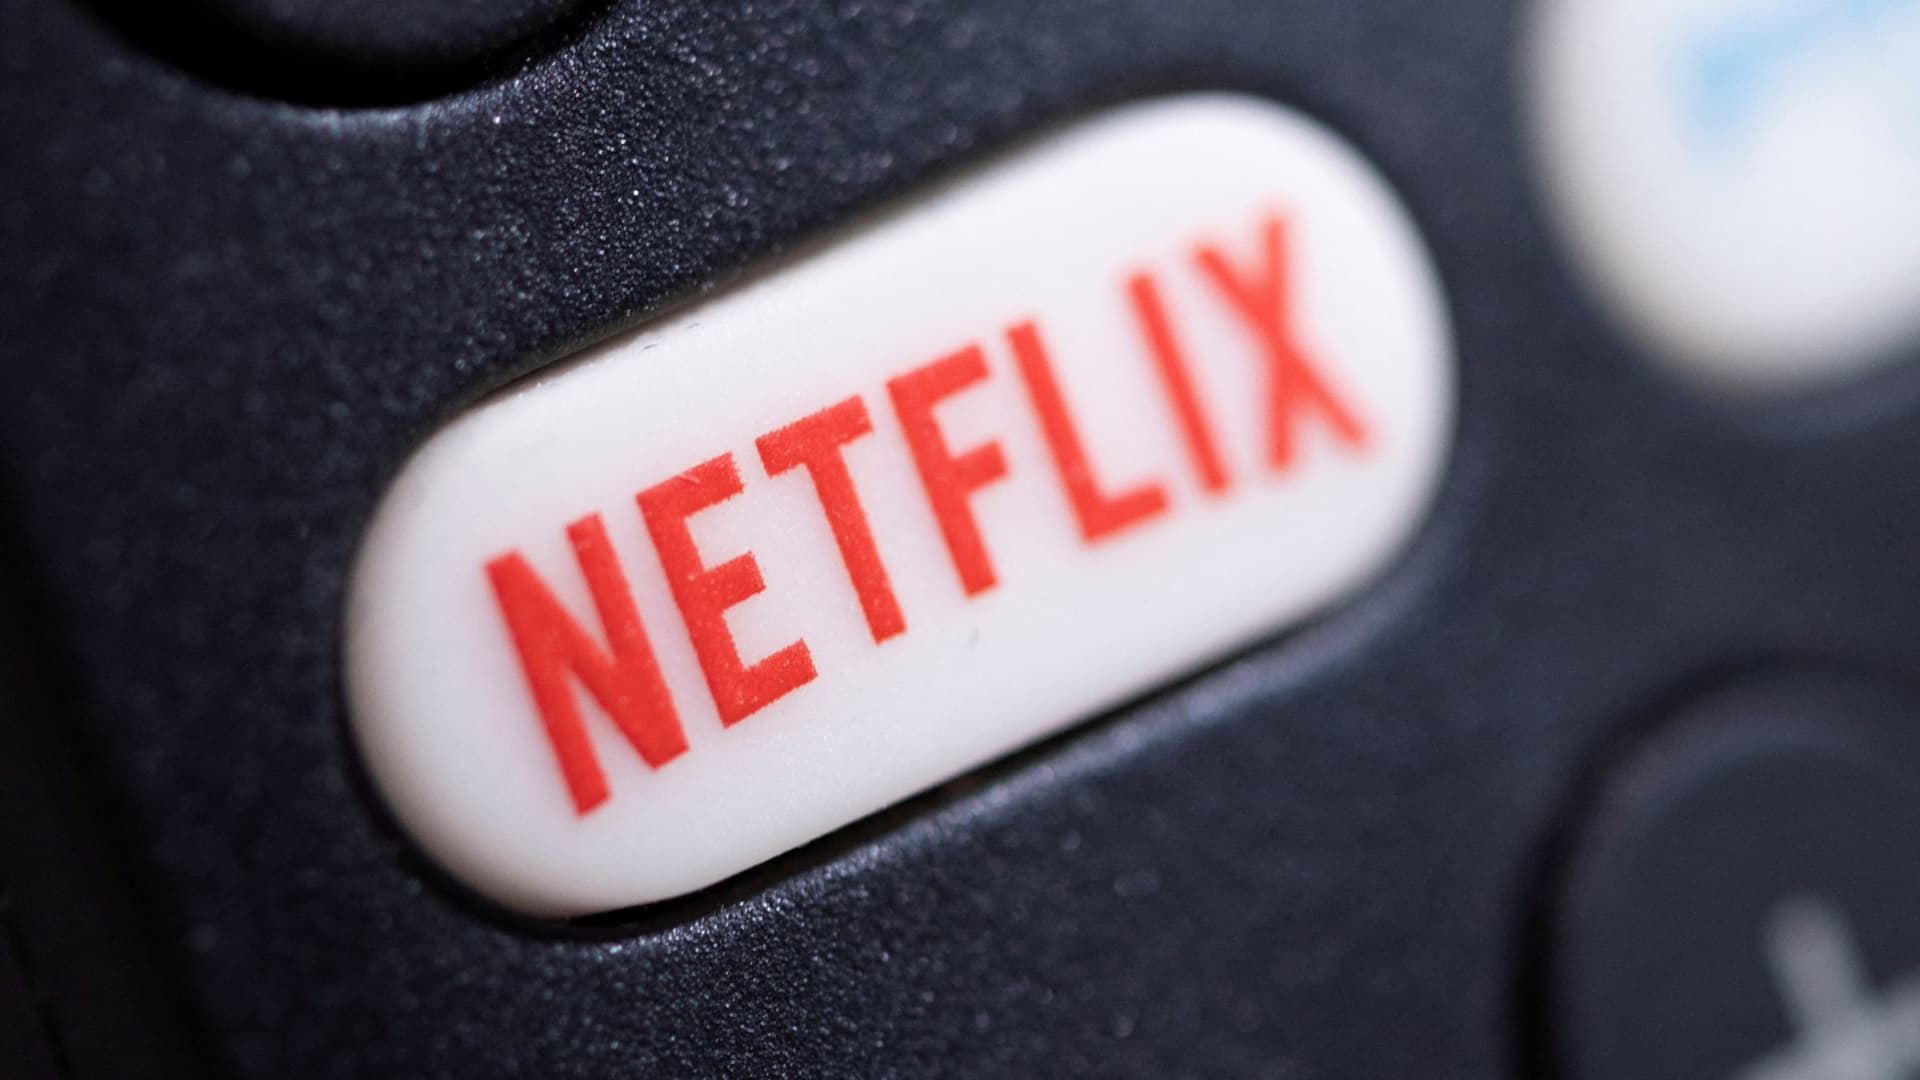 The Netflix logo is seen on a TV remote controller, in this illustration taken January 20, 2022.